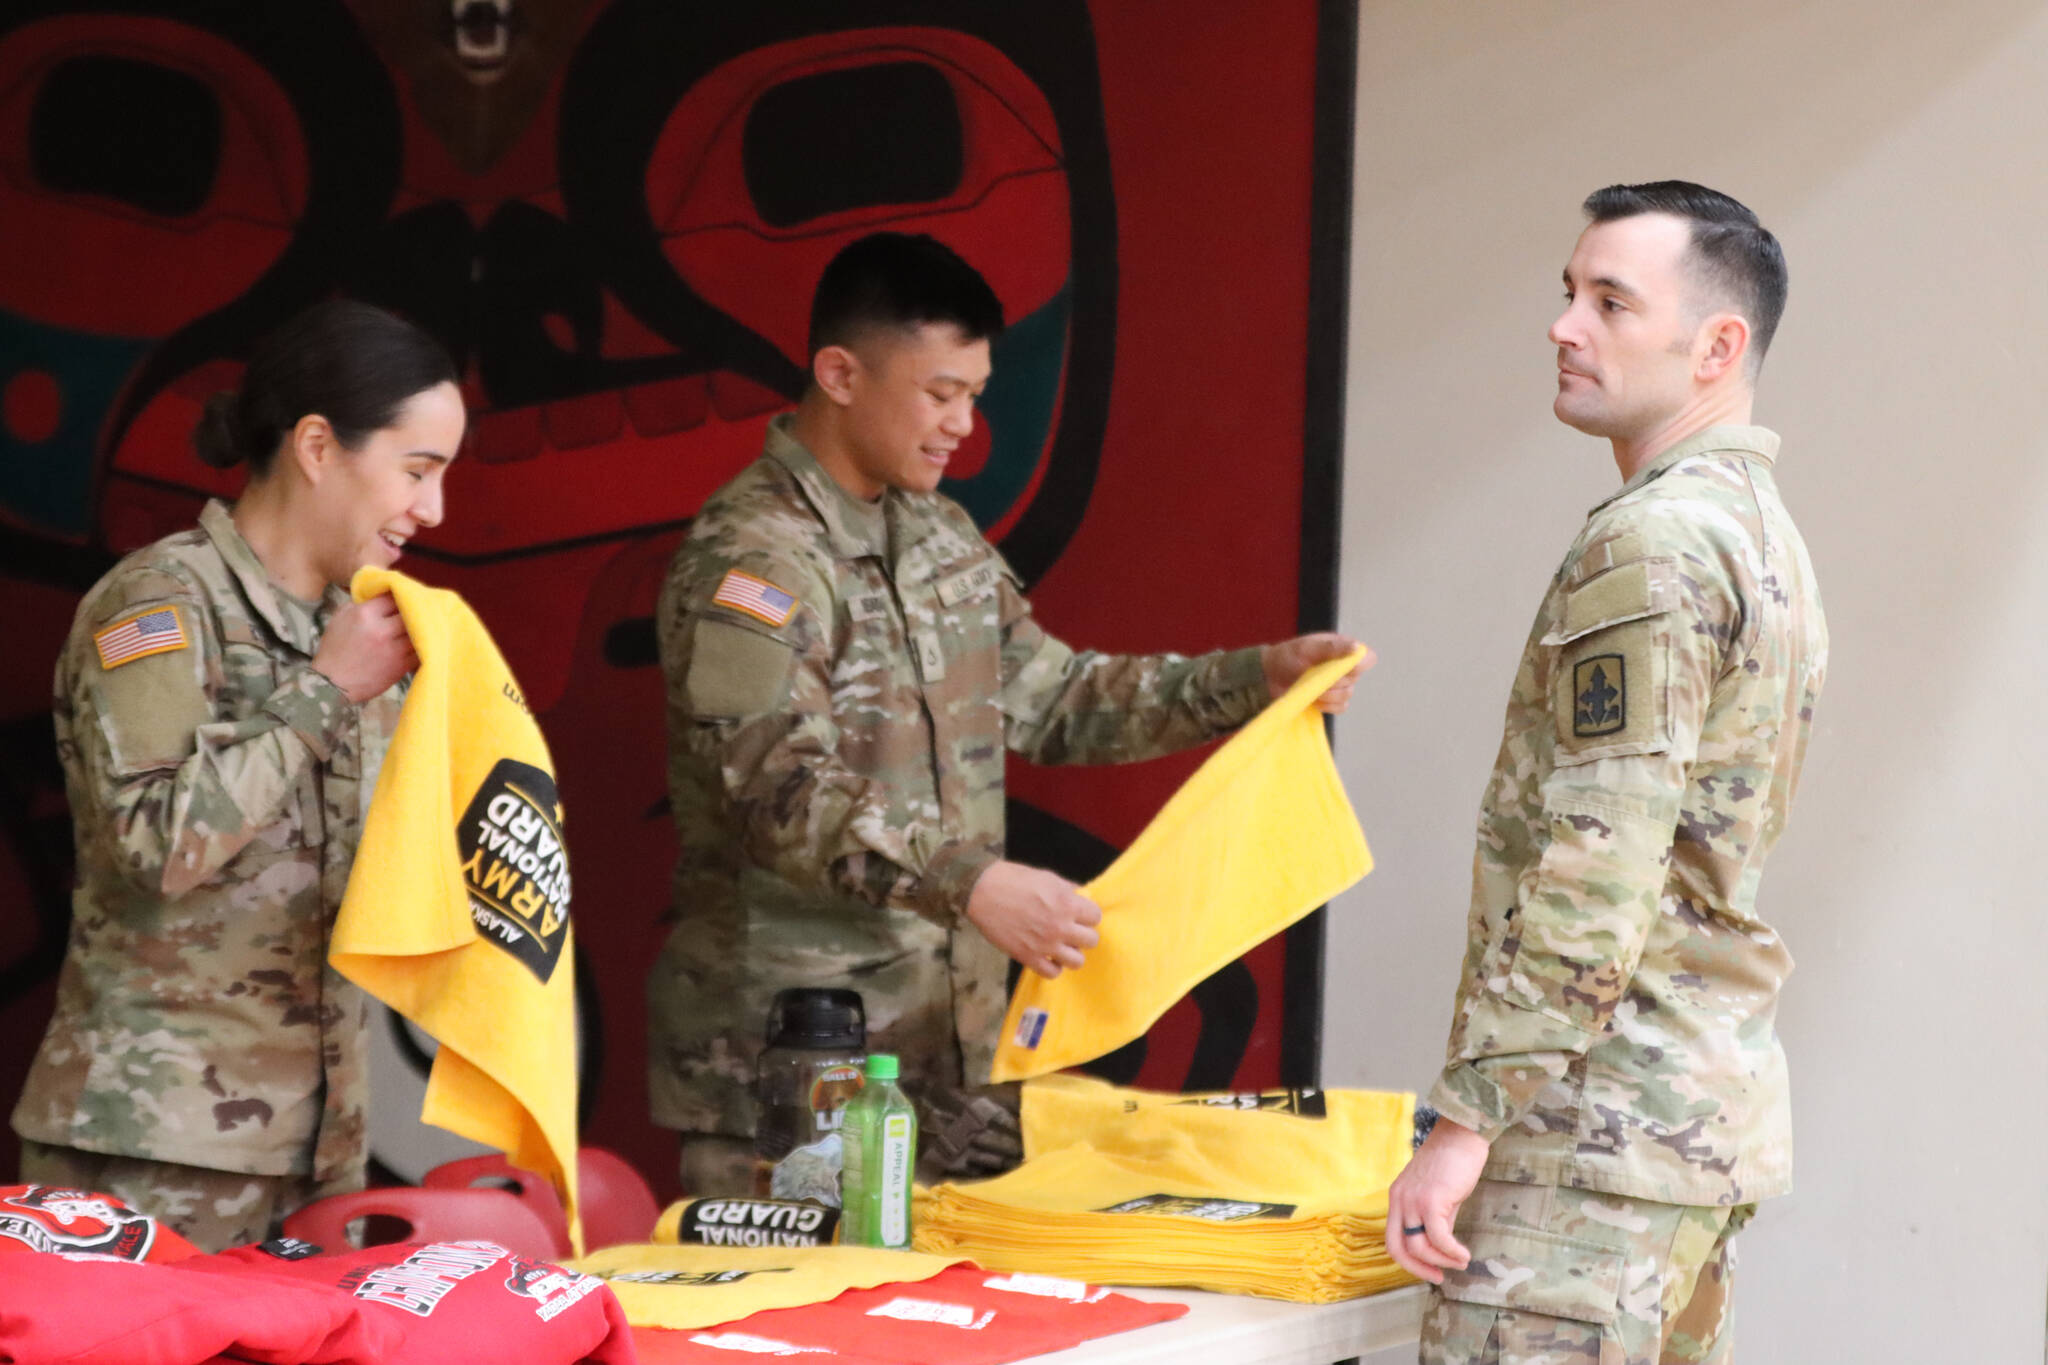 Members of the Alaska Army National Guard, Sgt. Heather Byrd, Staff Sgt. Sean Smack and Private First Class Kyrell De La Rosa hand out t-shirts and towels during Wednesday night’s Military Appreciation Night at JDHS. (Jonson Kuhn / Juneau Empire)